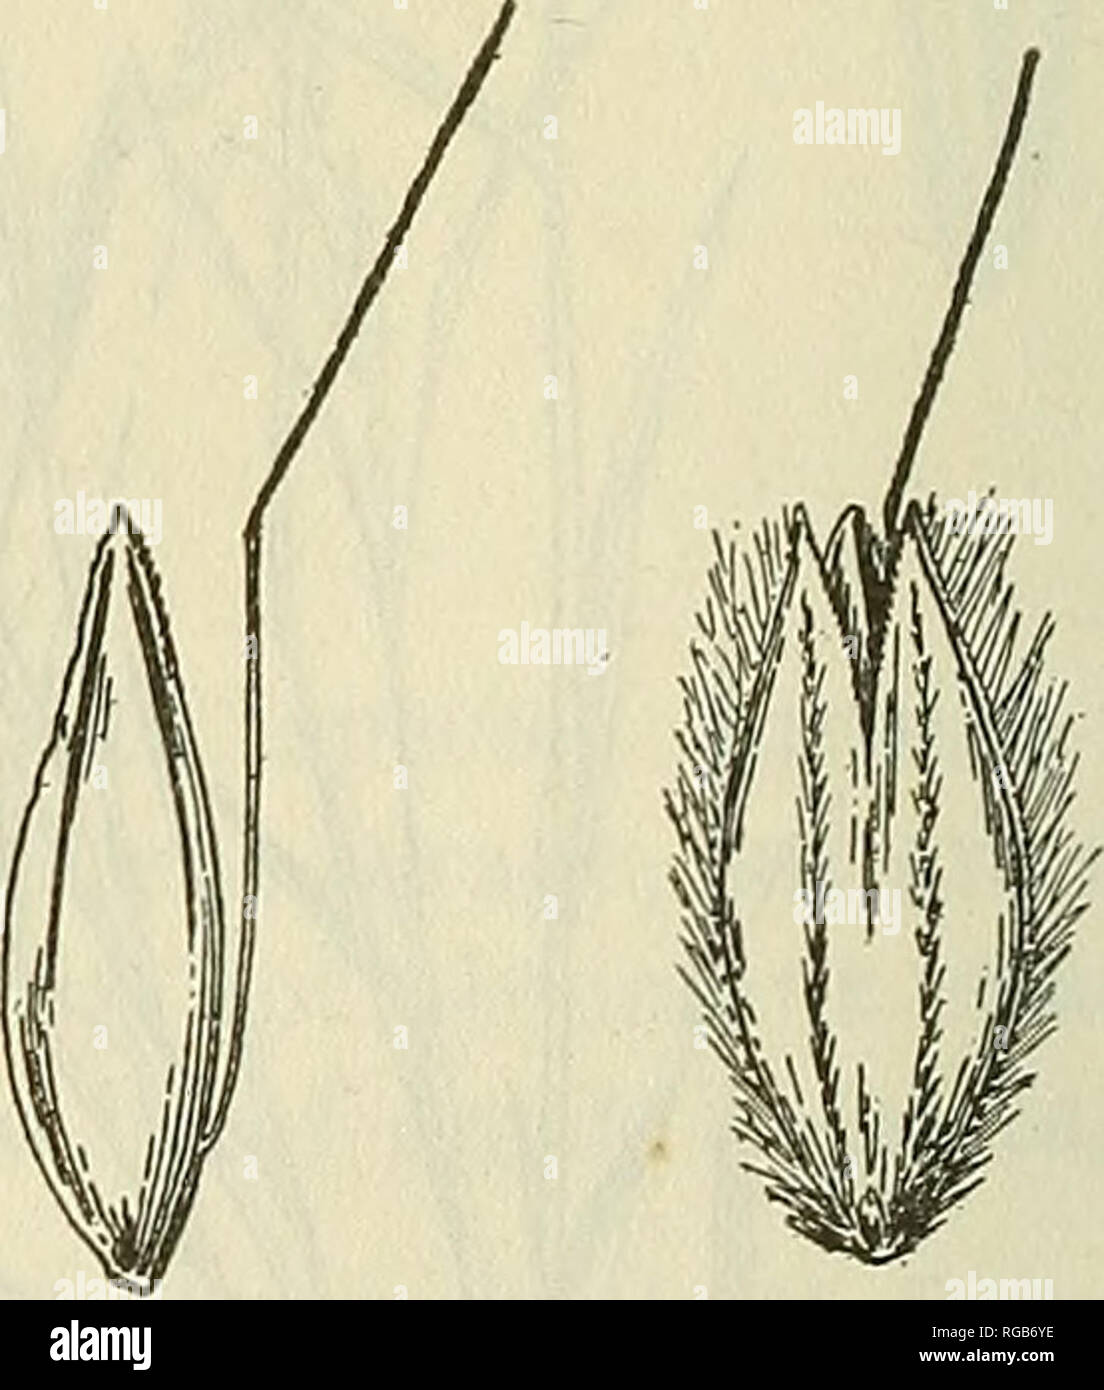 . Bulletin of the U.S. Department of Agriculture. Agriculture; Agriculture. glumes has been named L. arhansana pilosa (Trin.) Scribn. 61. Alopecurtjs L., the meadow foxtails. Spikelets 1-flowered, disar- ticulating below the glumes, strongly compressed laterally; glumes equal, awnless, usually united at base, ciliate on the keel; lemma about as long as the glumes, 5-nerved, ob- tuse, the margins united at base, bearing from below the middle a slender dorsal awn, this included or ex- serted two or three times the length of the spikelet; palea wanting. Low or moderately tall per- ennial grasses  Stock Photo